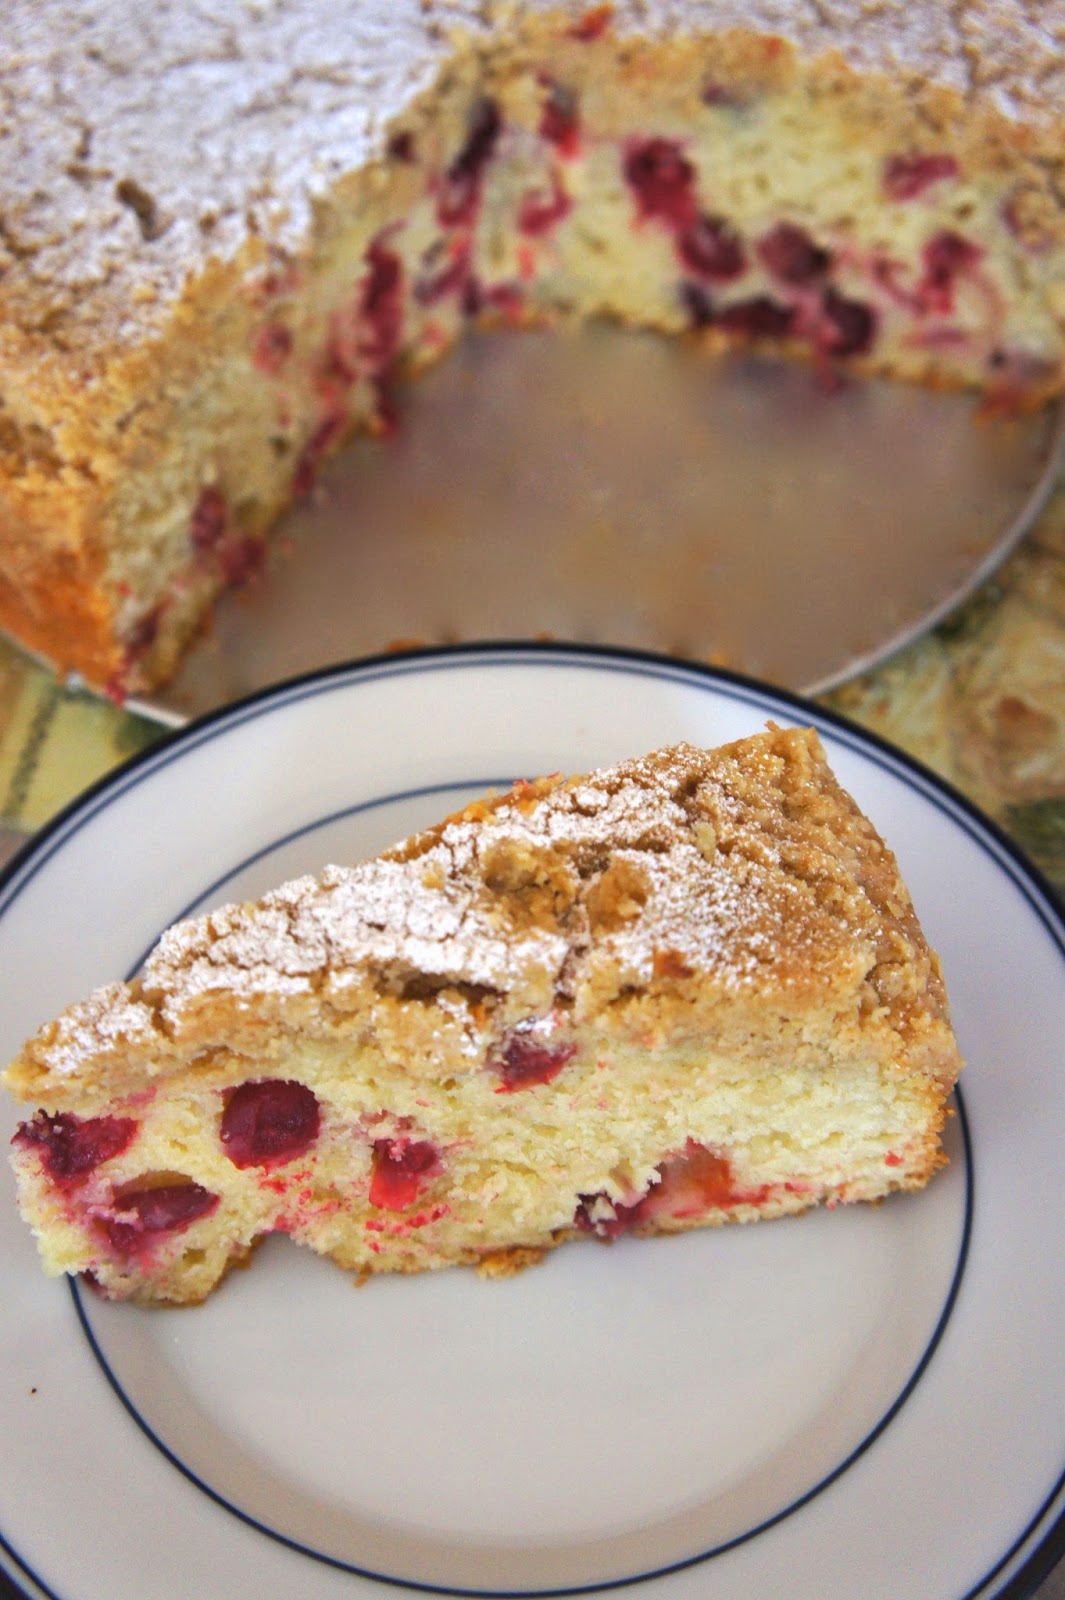 Savory Sweet and Satisfying: Cranberry Almond Streusel Coffee Cake